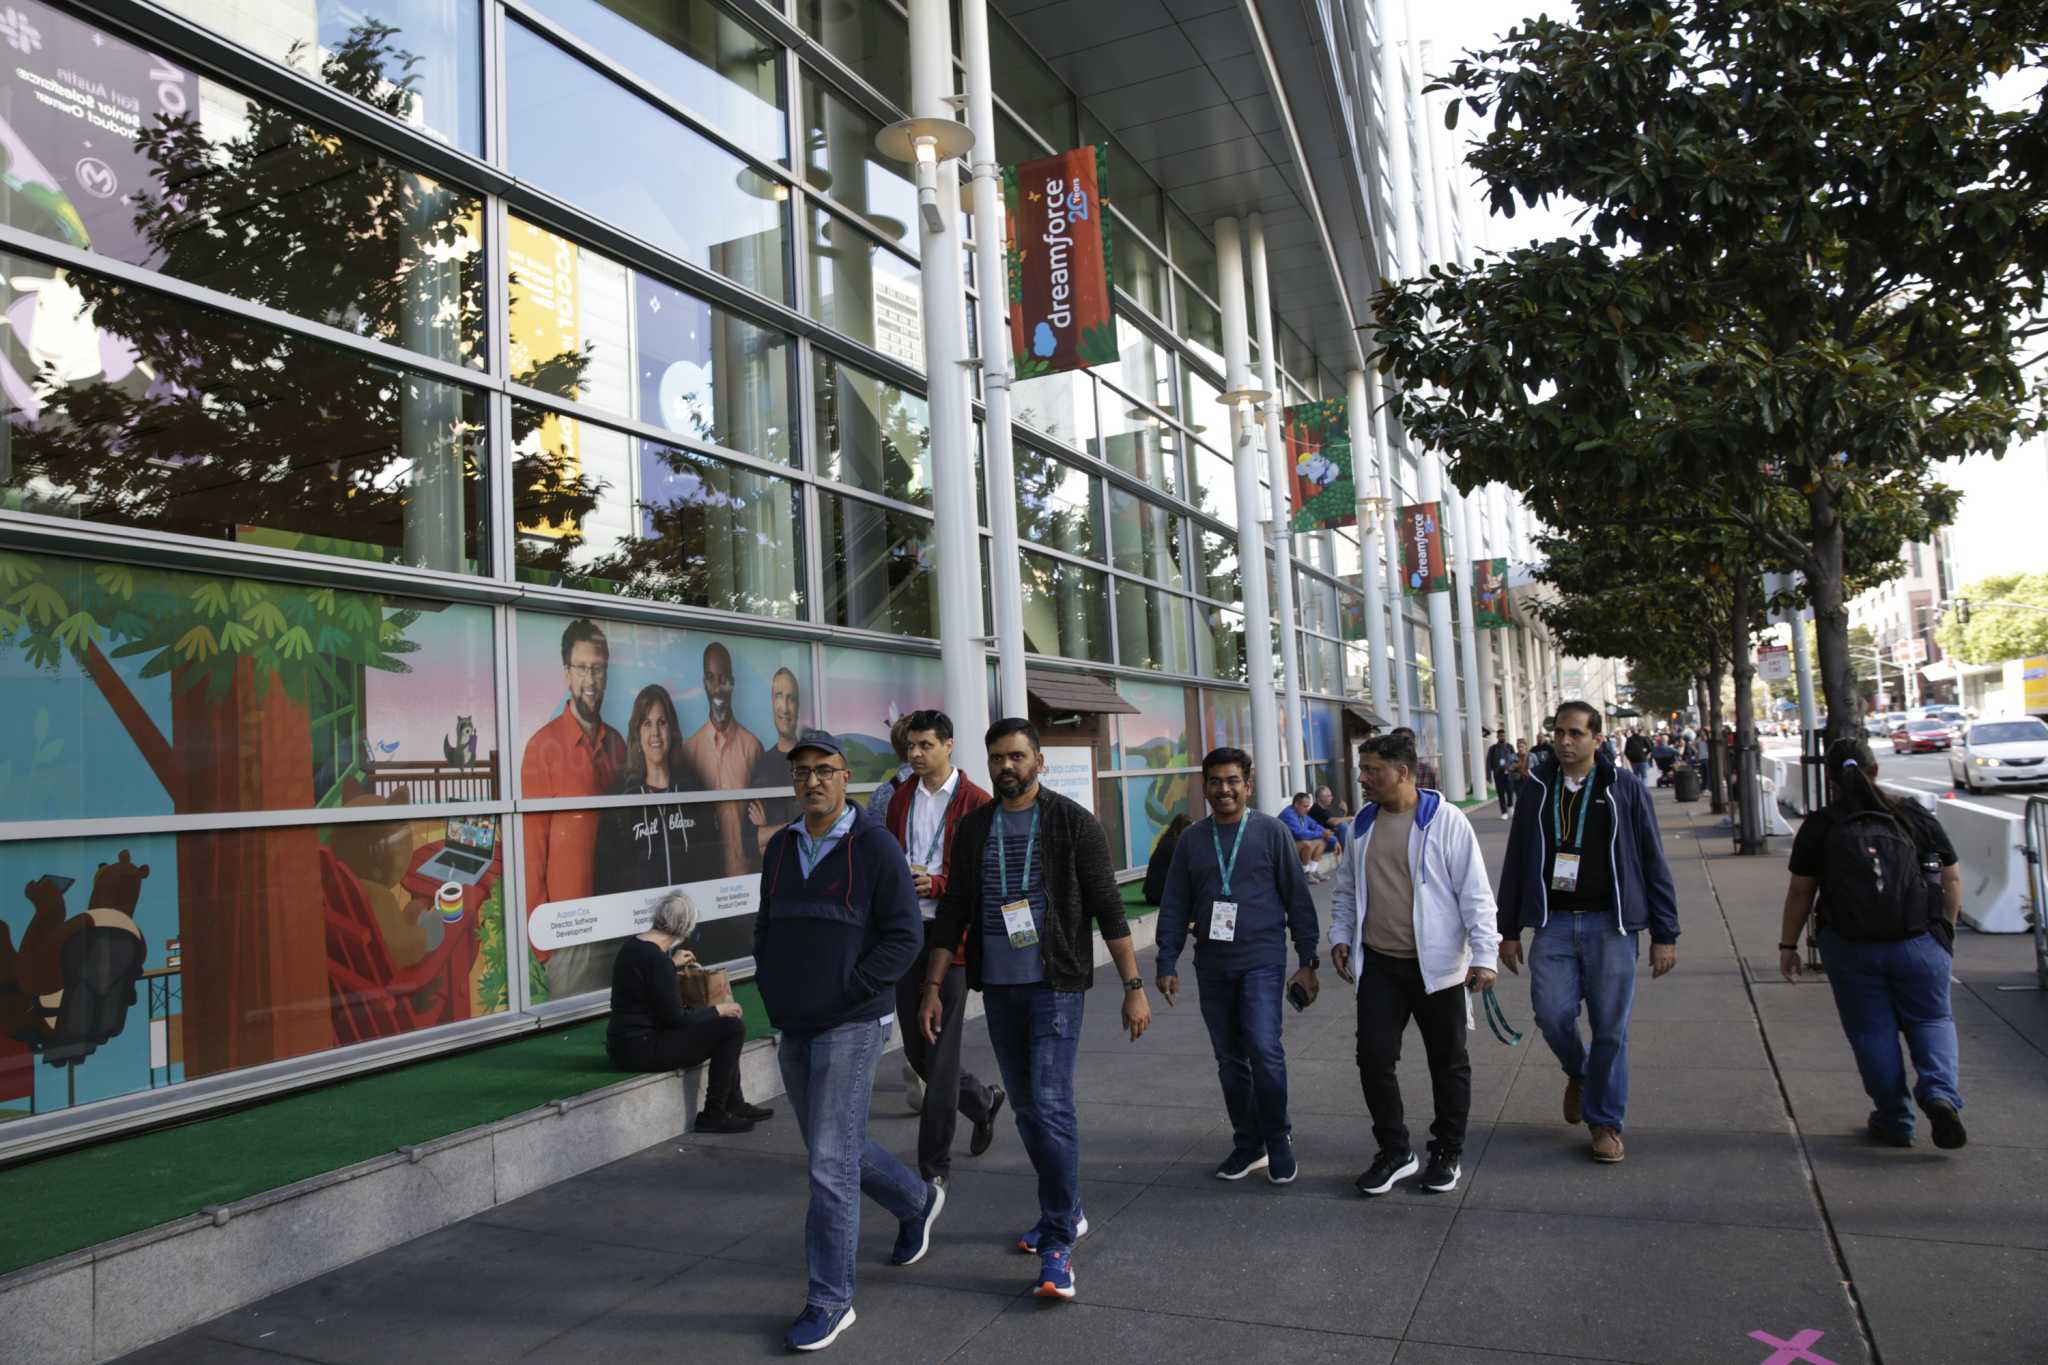 Marc Benioff: Dreamforce could leave S.F. if affected by homelessness